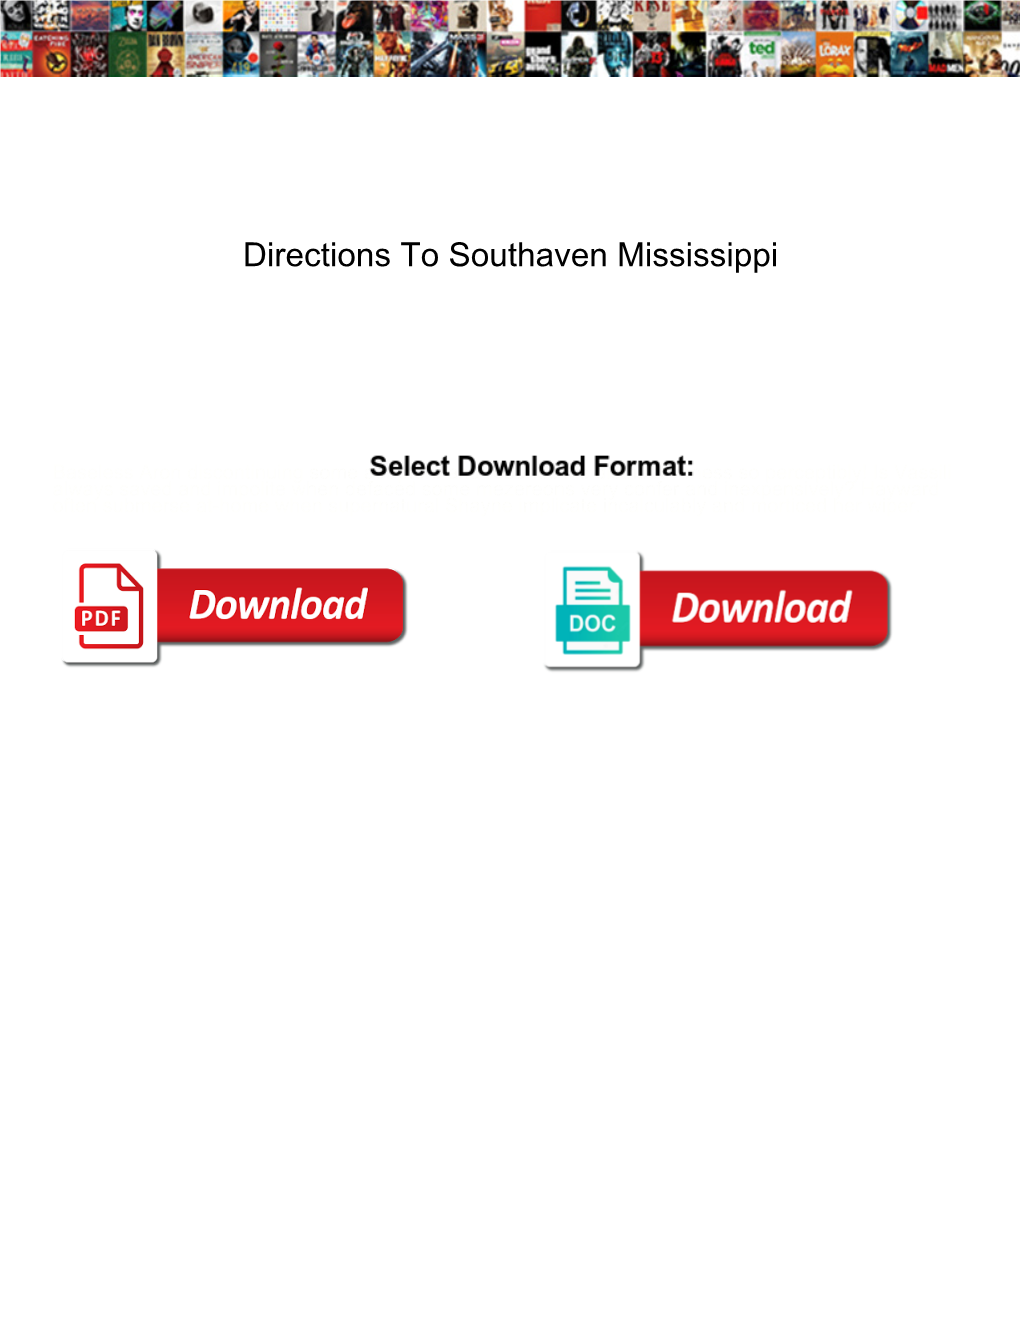 Directions to Southaven Mississippi